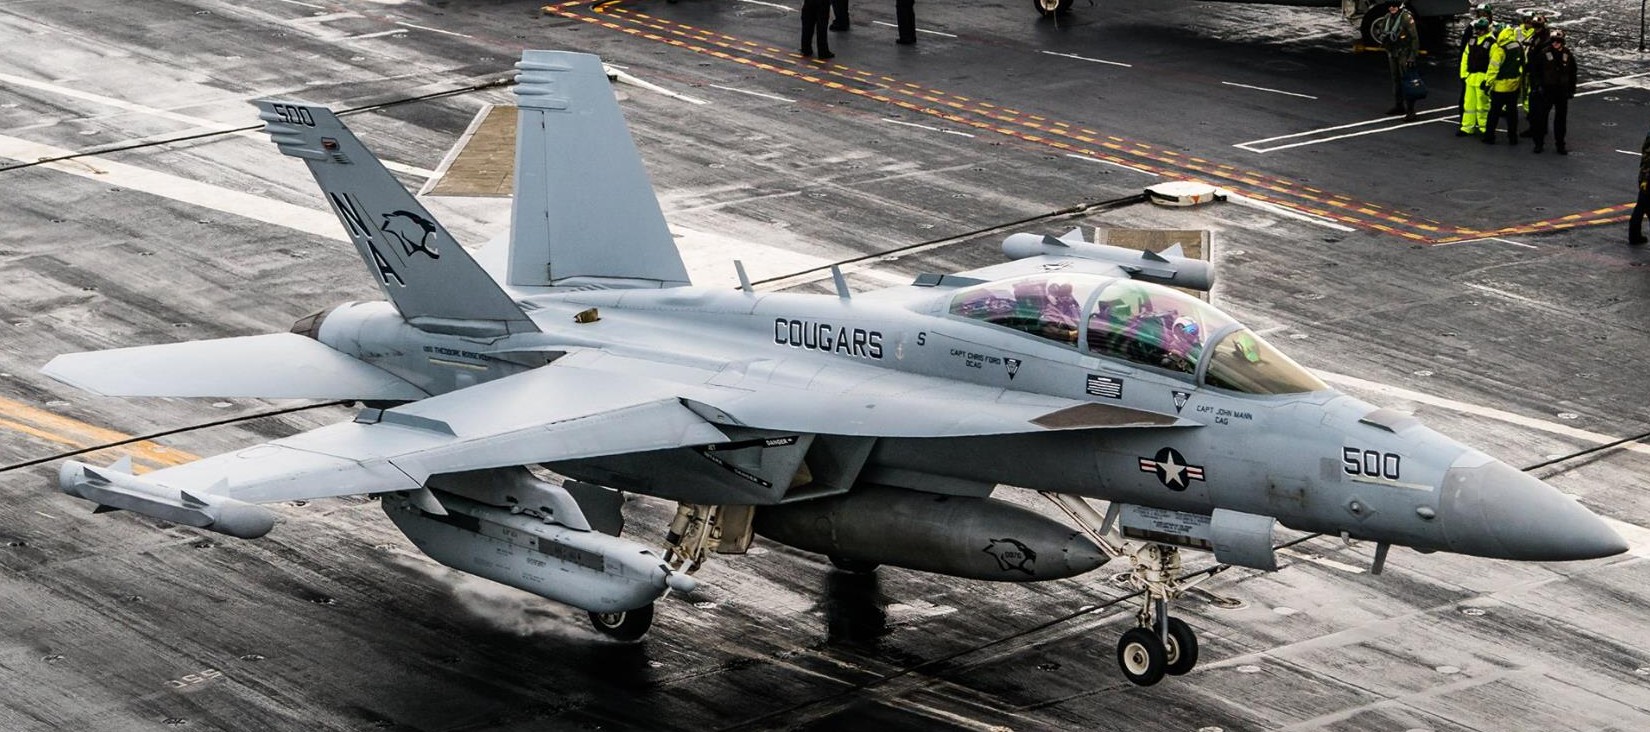 vaq-139 cougars electronic attack squadron us navy ea-18g growler cvw-17 uss theodore roosevelt cvn-71 70